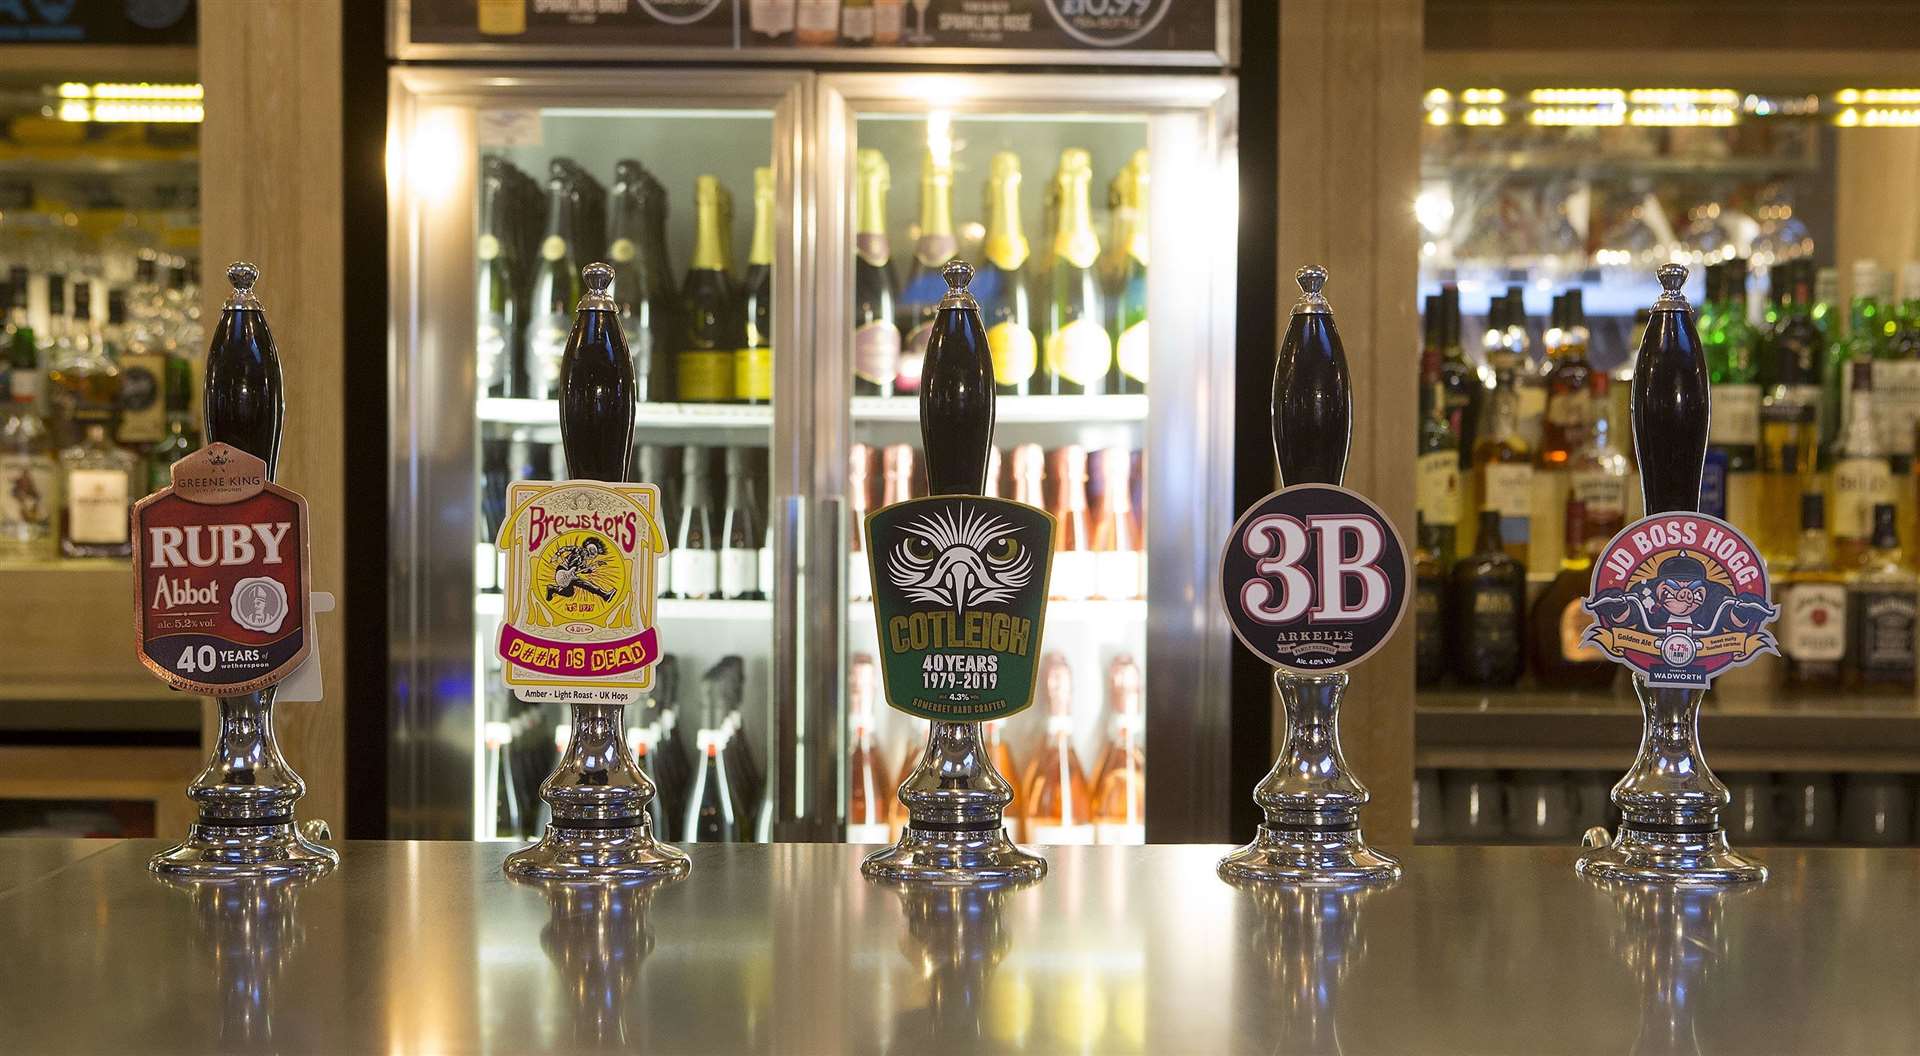 Wetherspoon's short lived proposal on alcohol limits sparked debate on social media